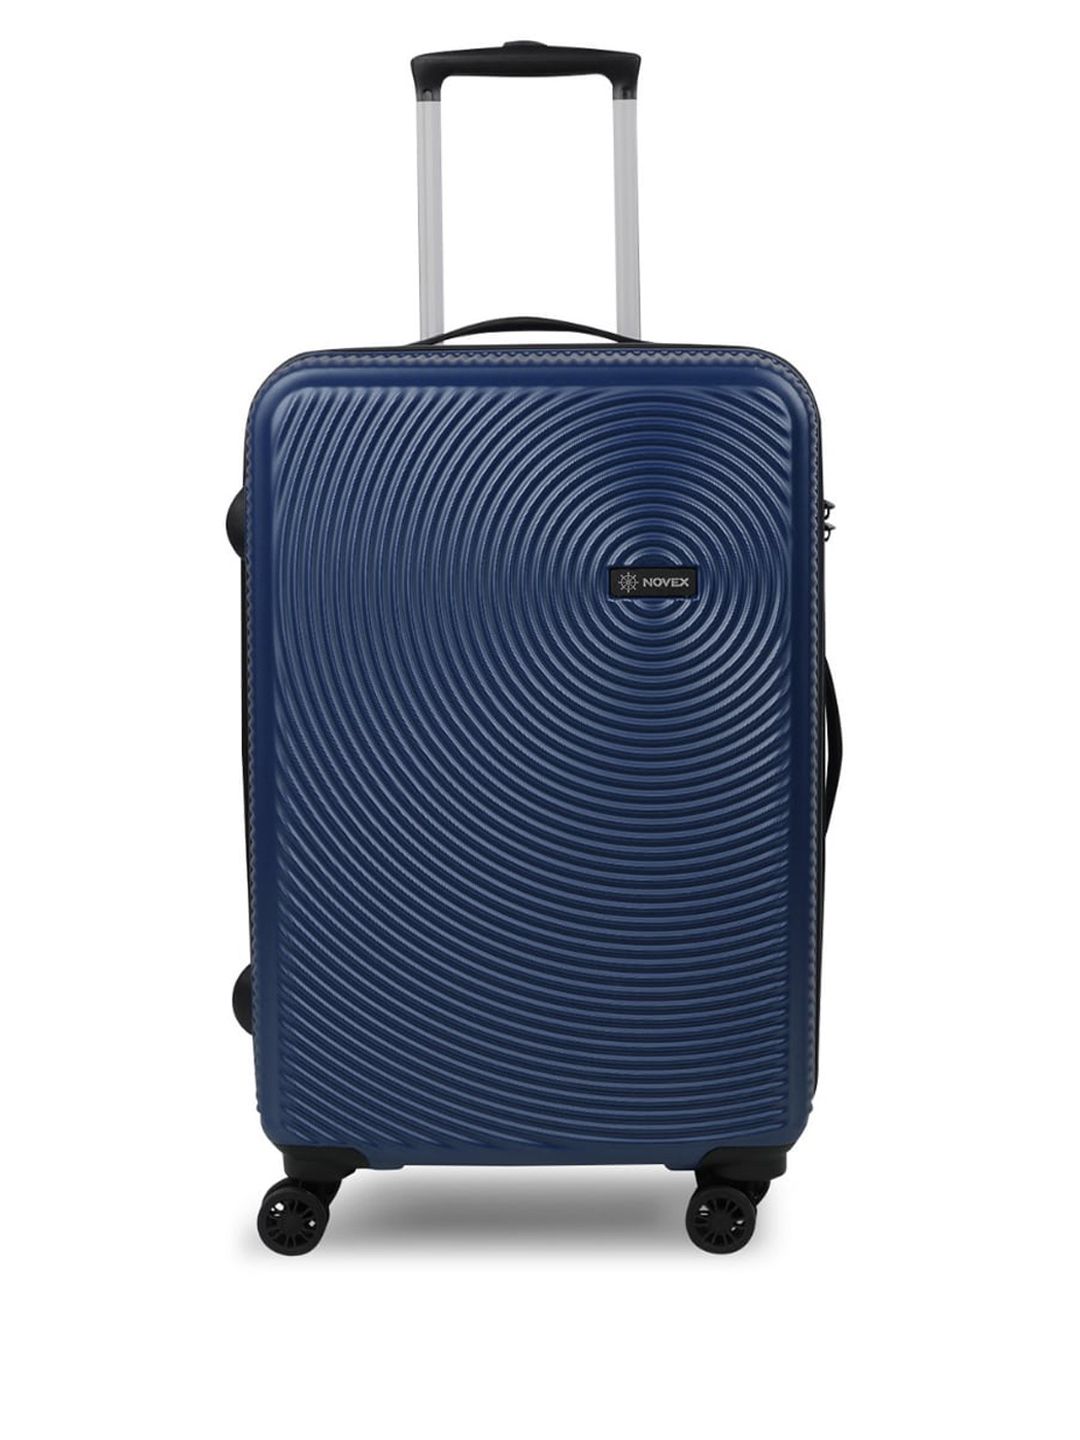 NOVEX Navy Blue Textured Hard-Sided Medium Trolley Suitcase Price in India